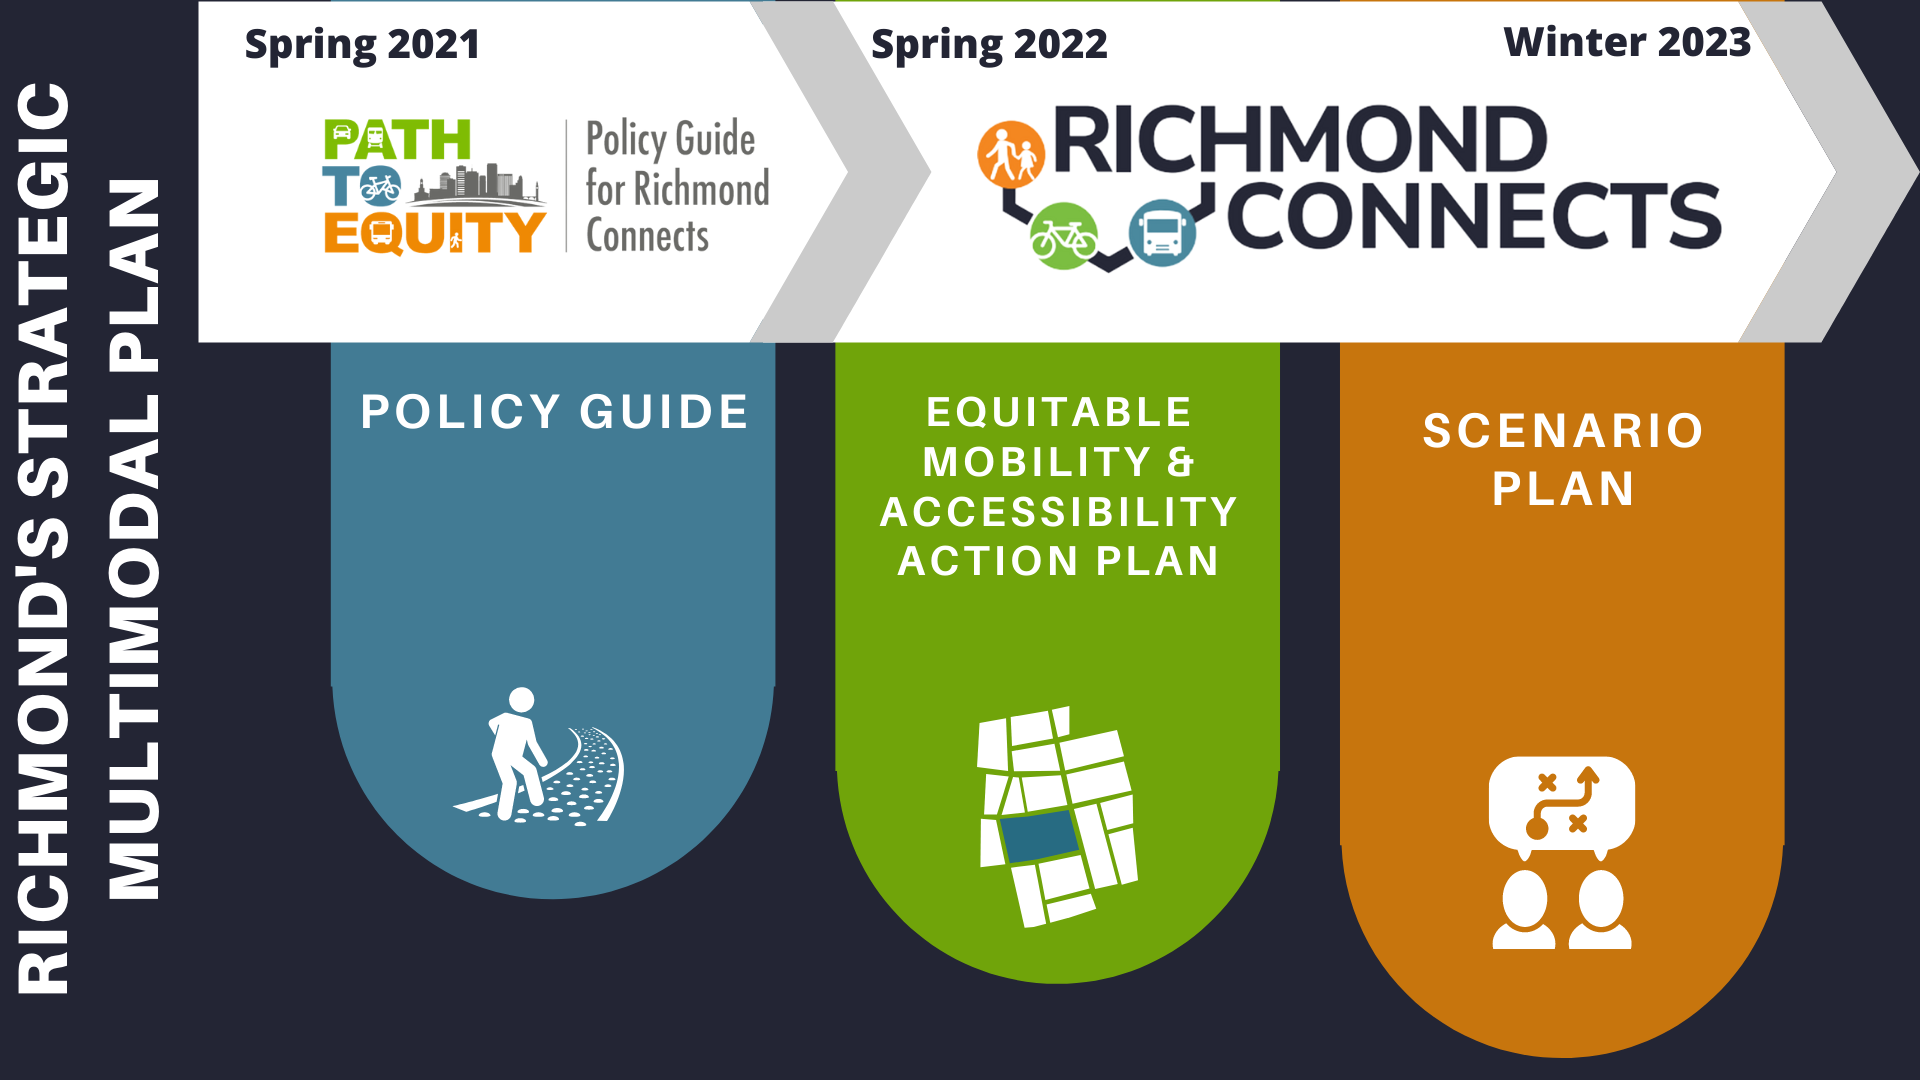 This image contains a timeline starting in Spring 2021 with the policy guide being completed in Spring 2022, and the Richmond Connects process kicking off in Spring 2022 and ending in Winter 2023.